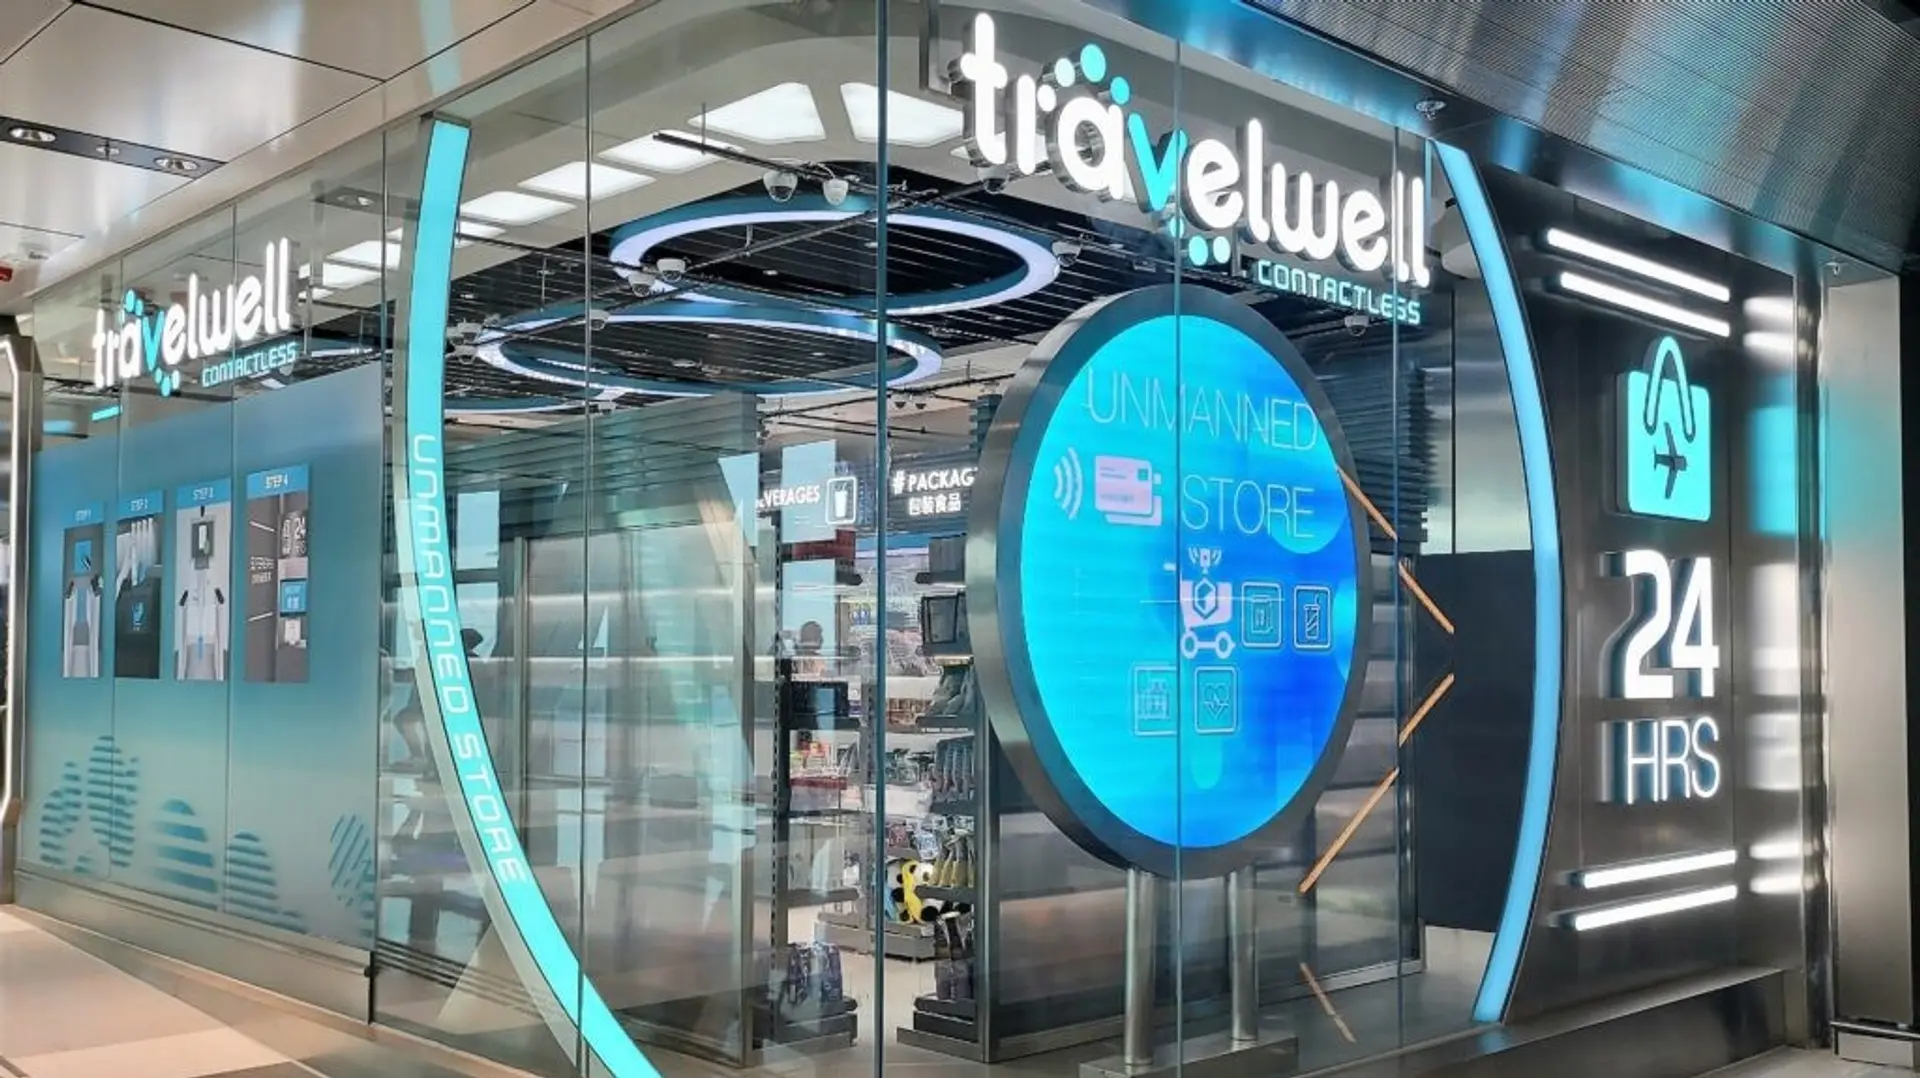 Airports News - Hong Kong International Airport opens unmanned retail outlet